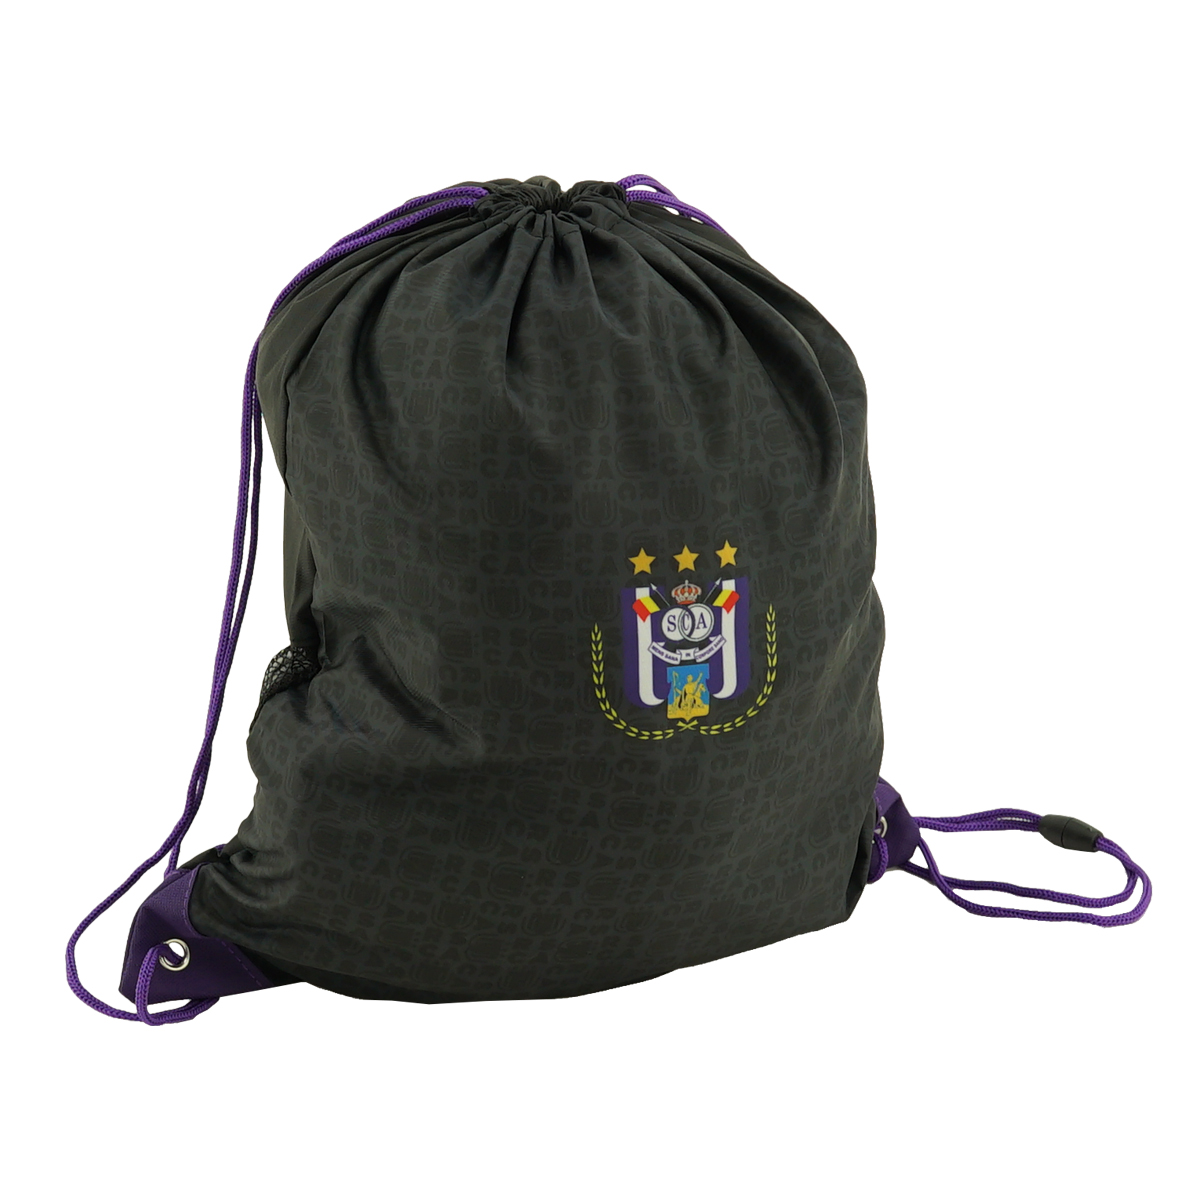 RSCA Gymbag/Swimbag - Black is-hover